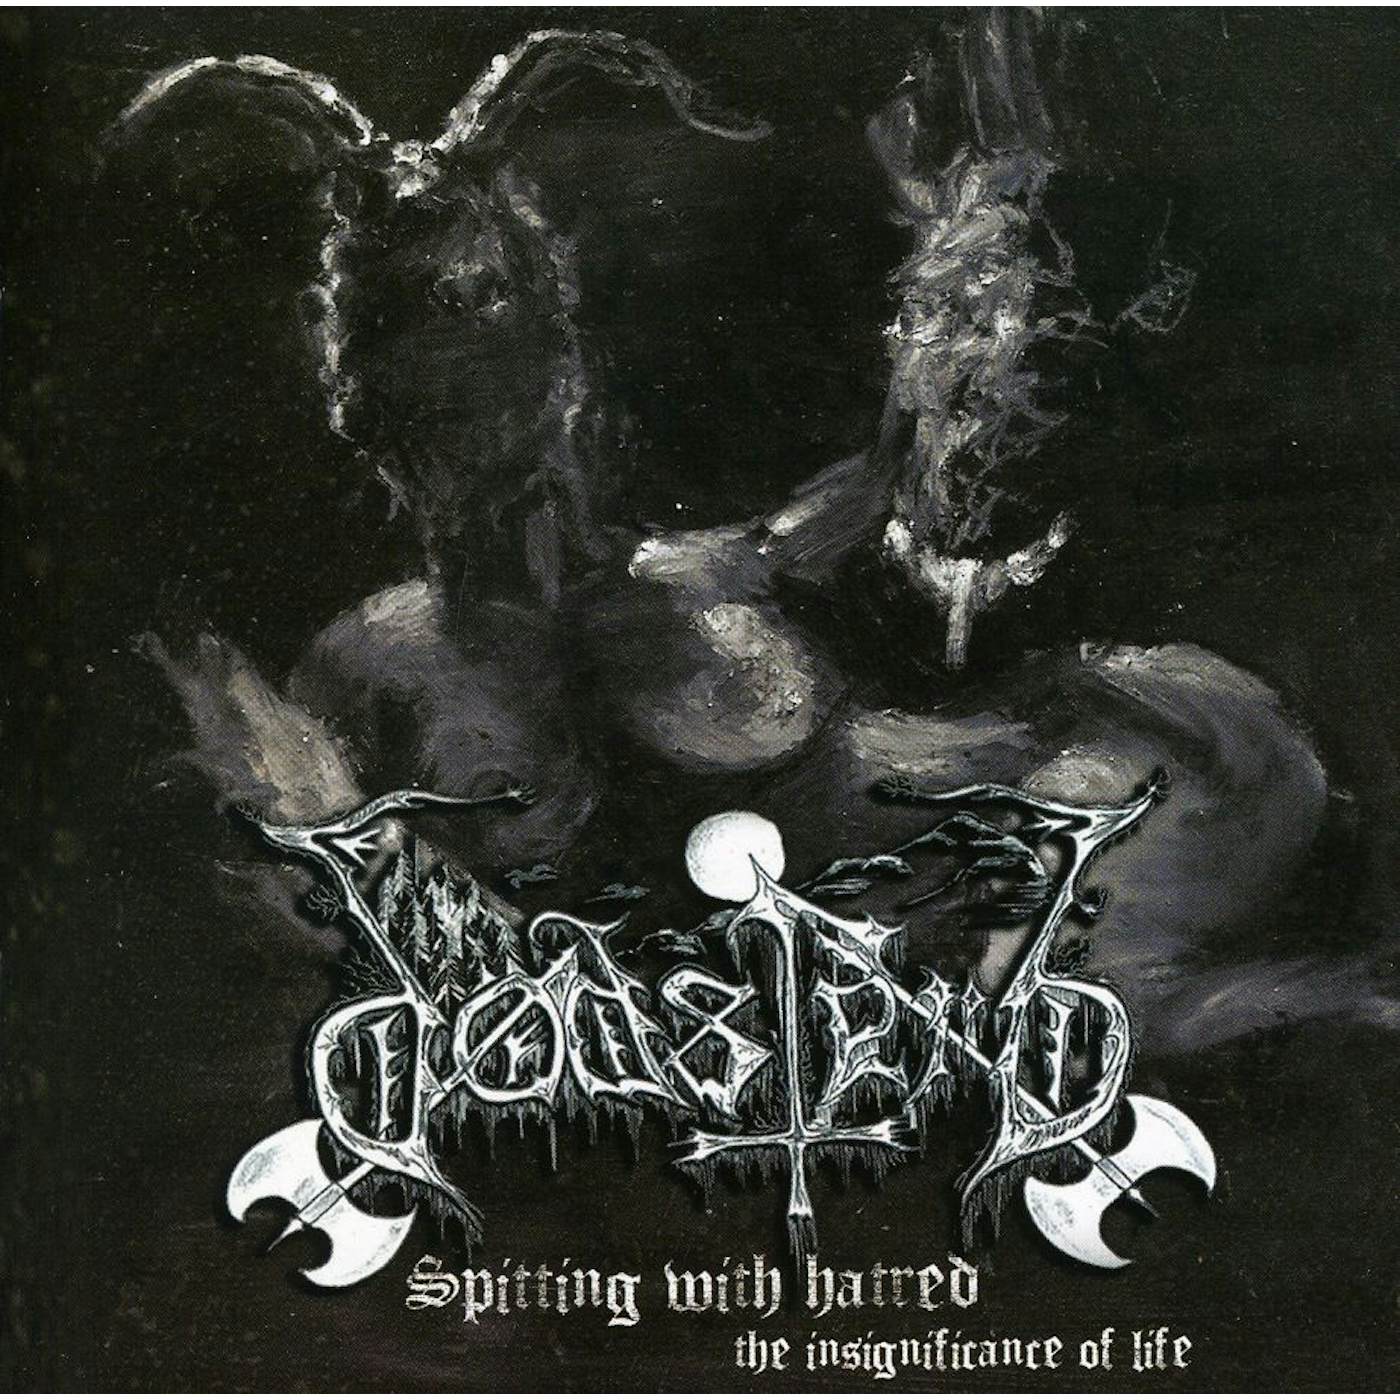 Dodsferd SPLITTING WITH HATRED THE INSIGNIFICANCE OF LIFE CD